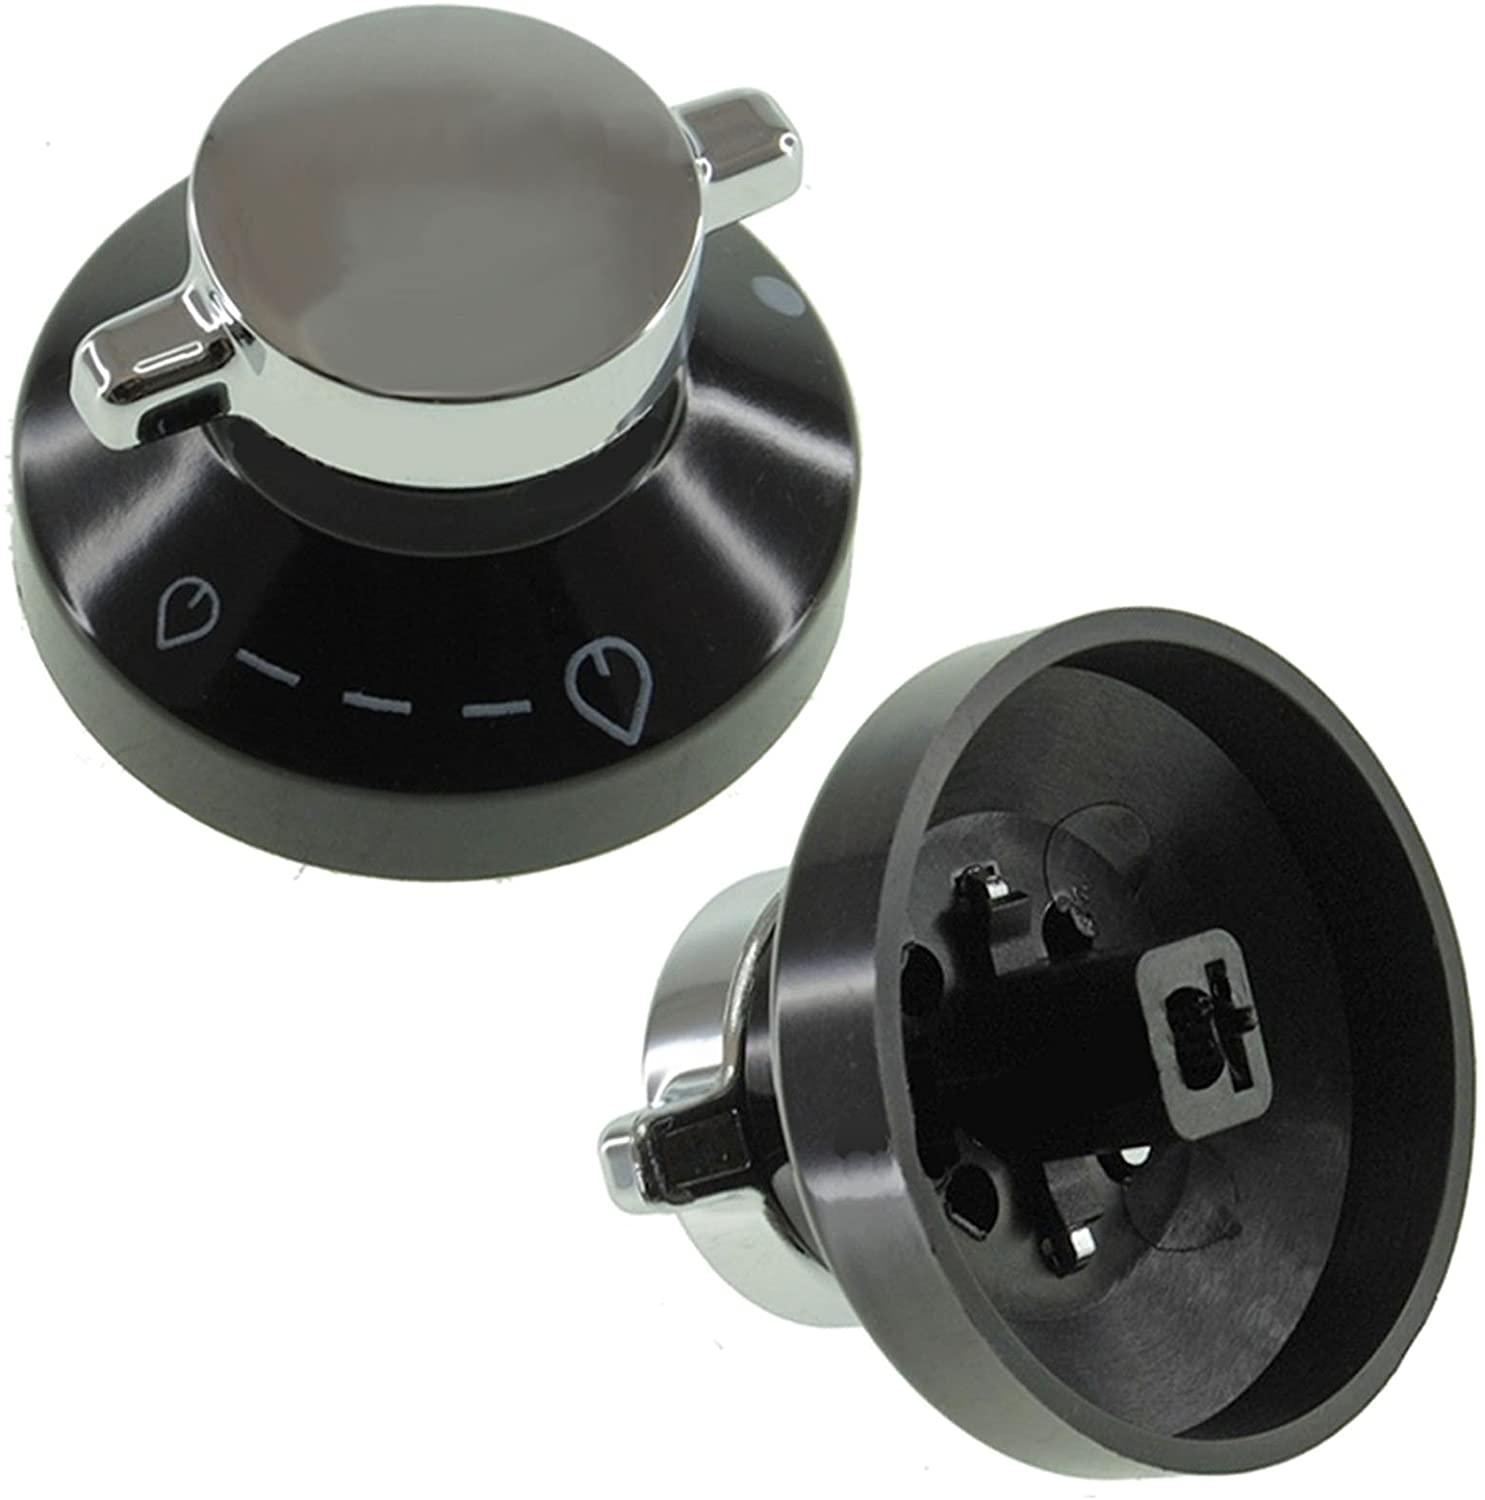 Gas Flame Control Knob for NEW WORLD Ovens & Cookers (Pack of 2 x Silver / Black)